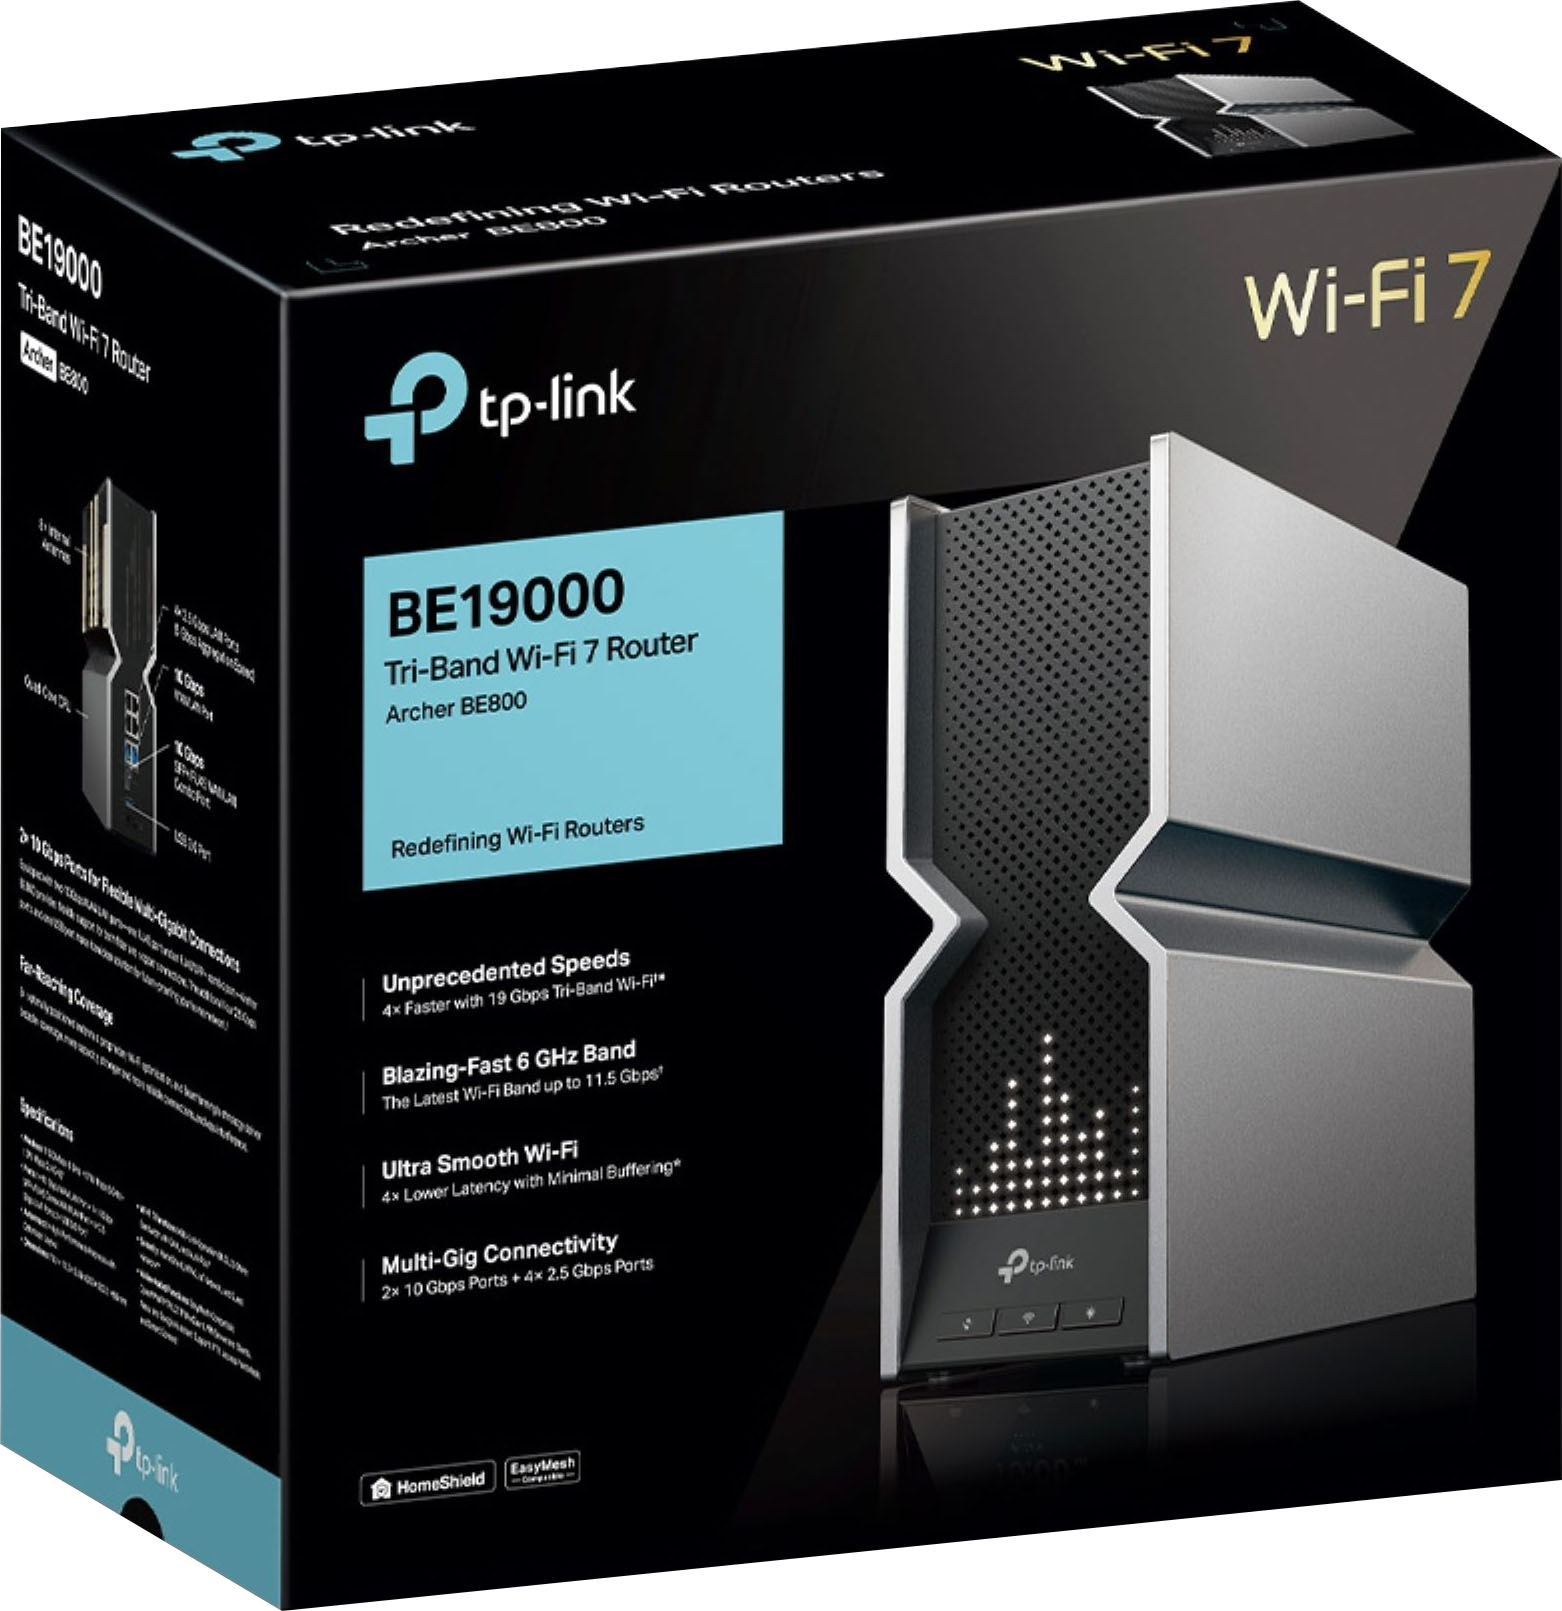 WiFi 7 Router Review  TP-Link Archer BE800 BE19000 WiFi 7 